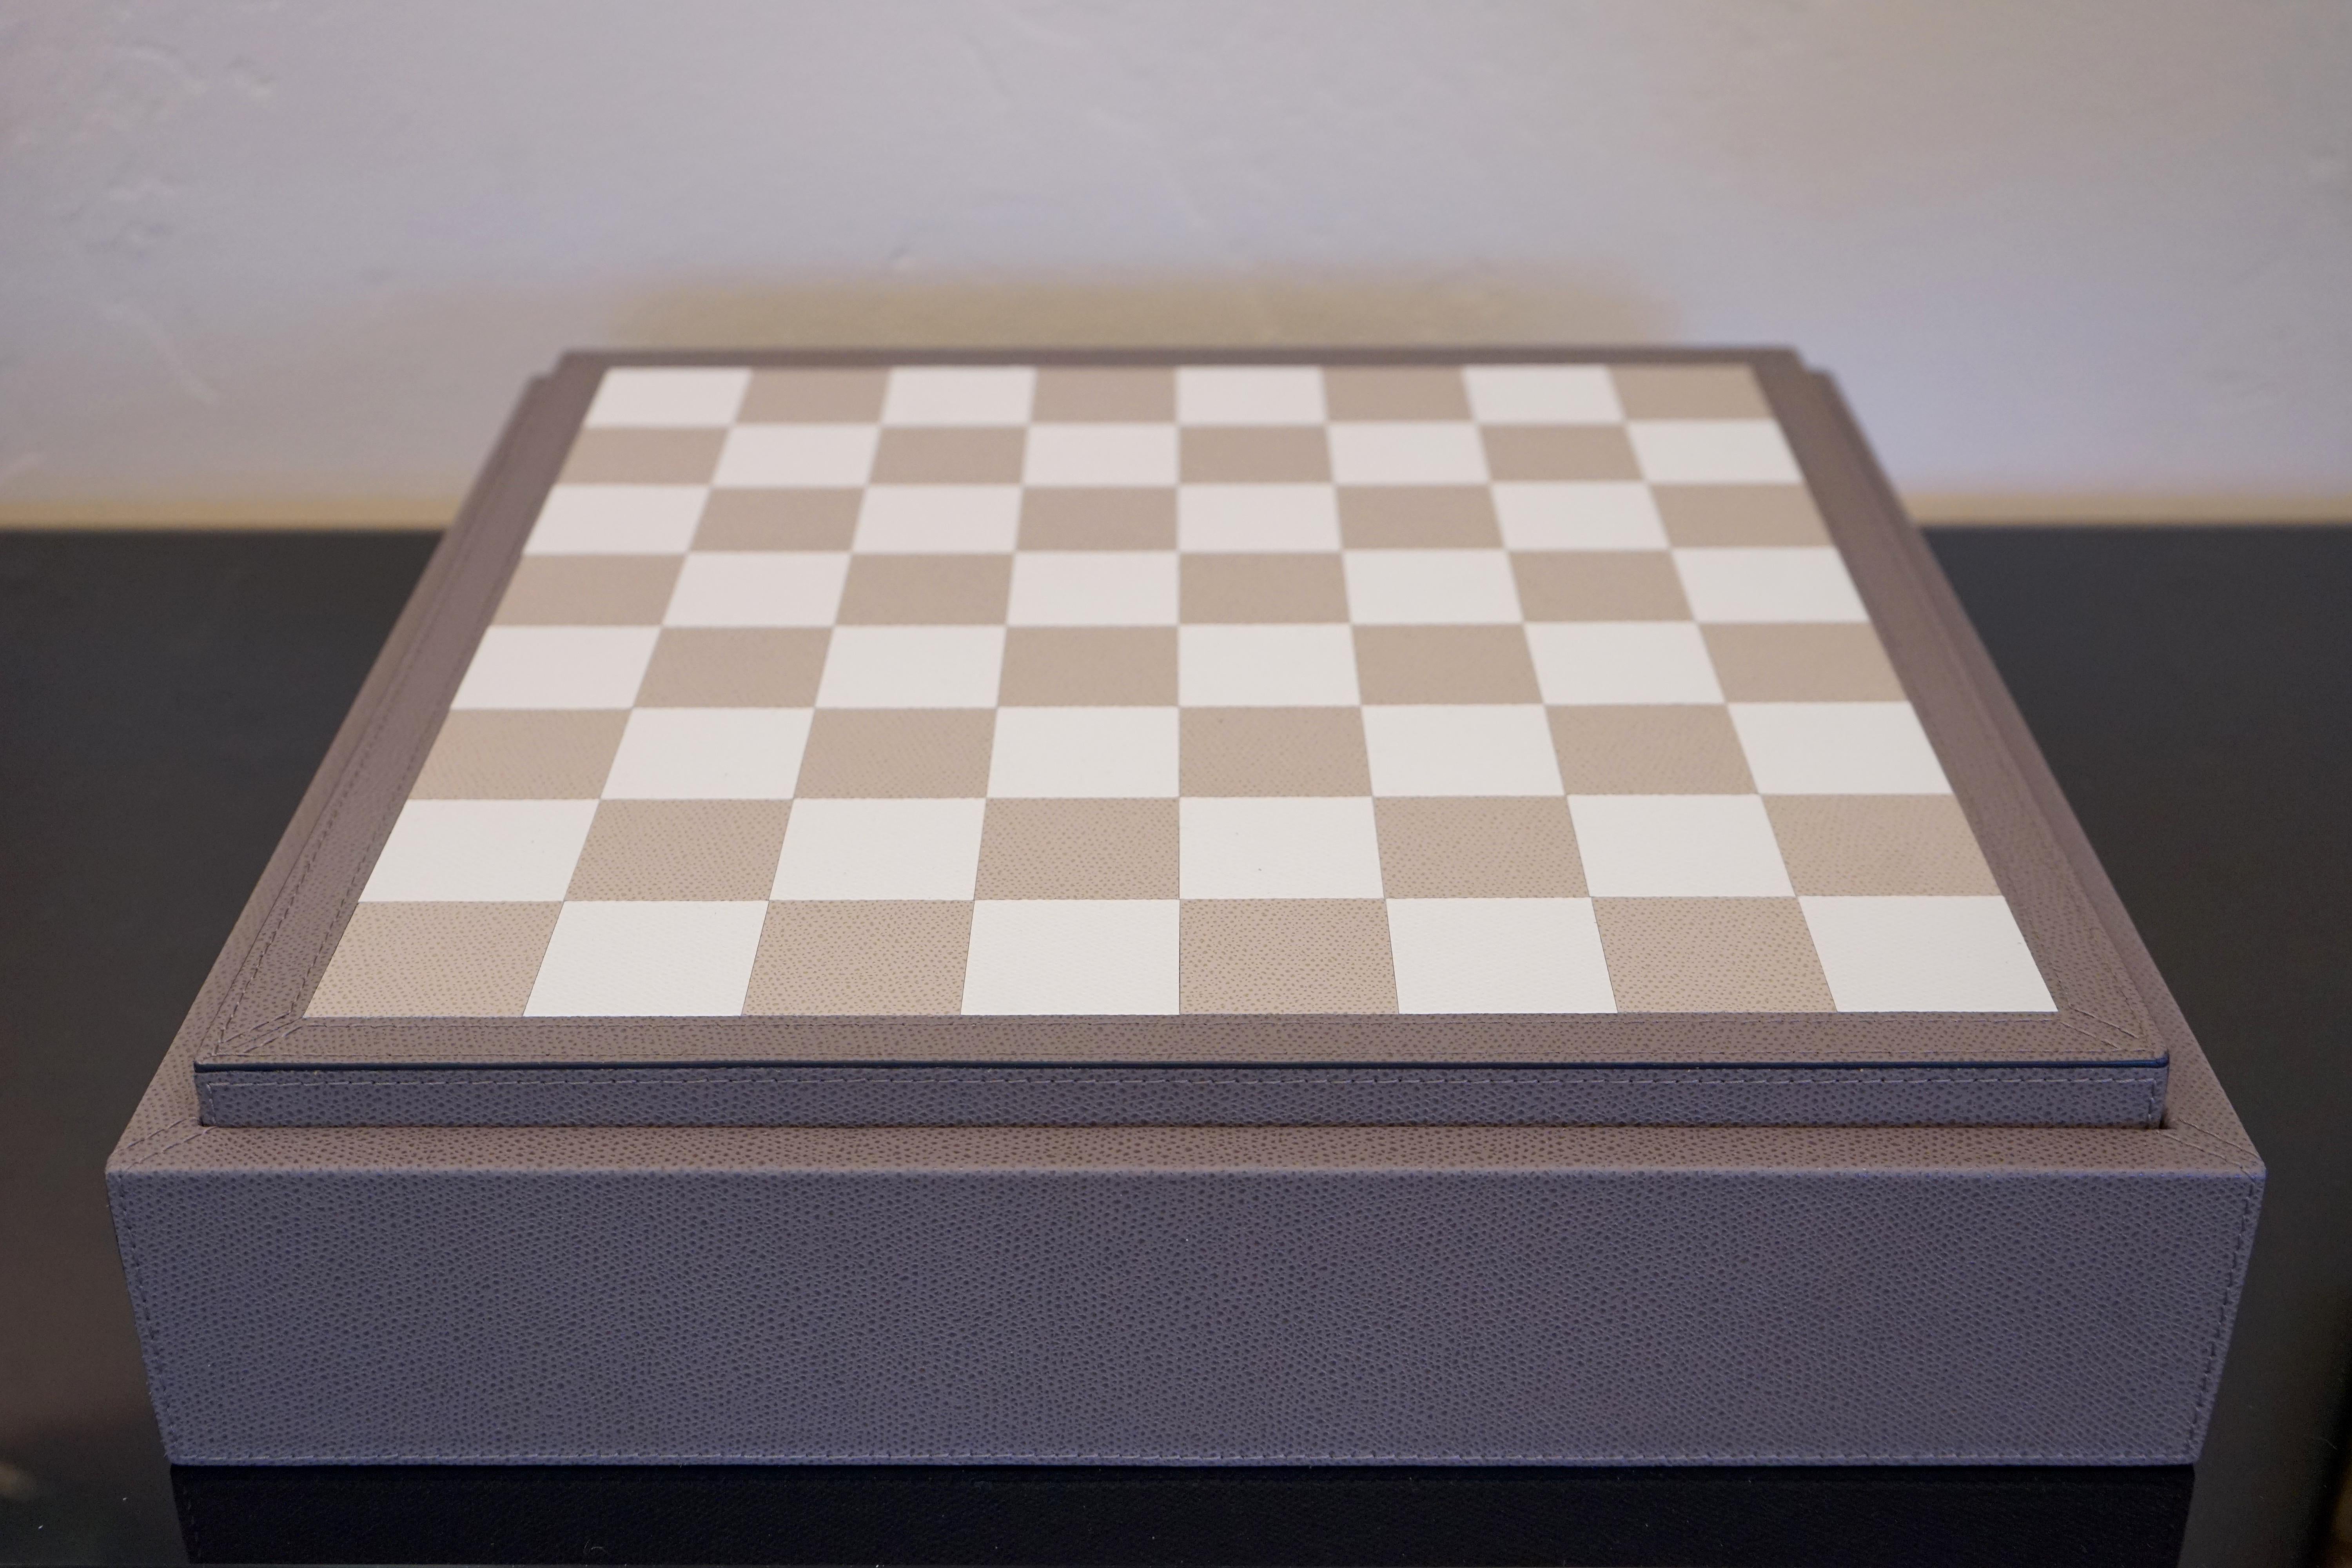 Contemporary leather board game with a removable lid to hide game pieces for three games: chess, dominos, and checkers. A perfect accessory for any desk or table. Stone and ivory leather color.